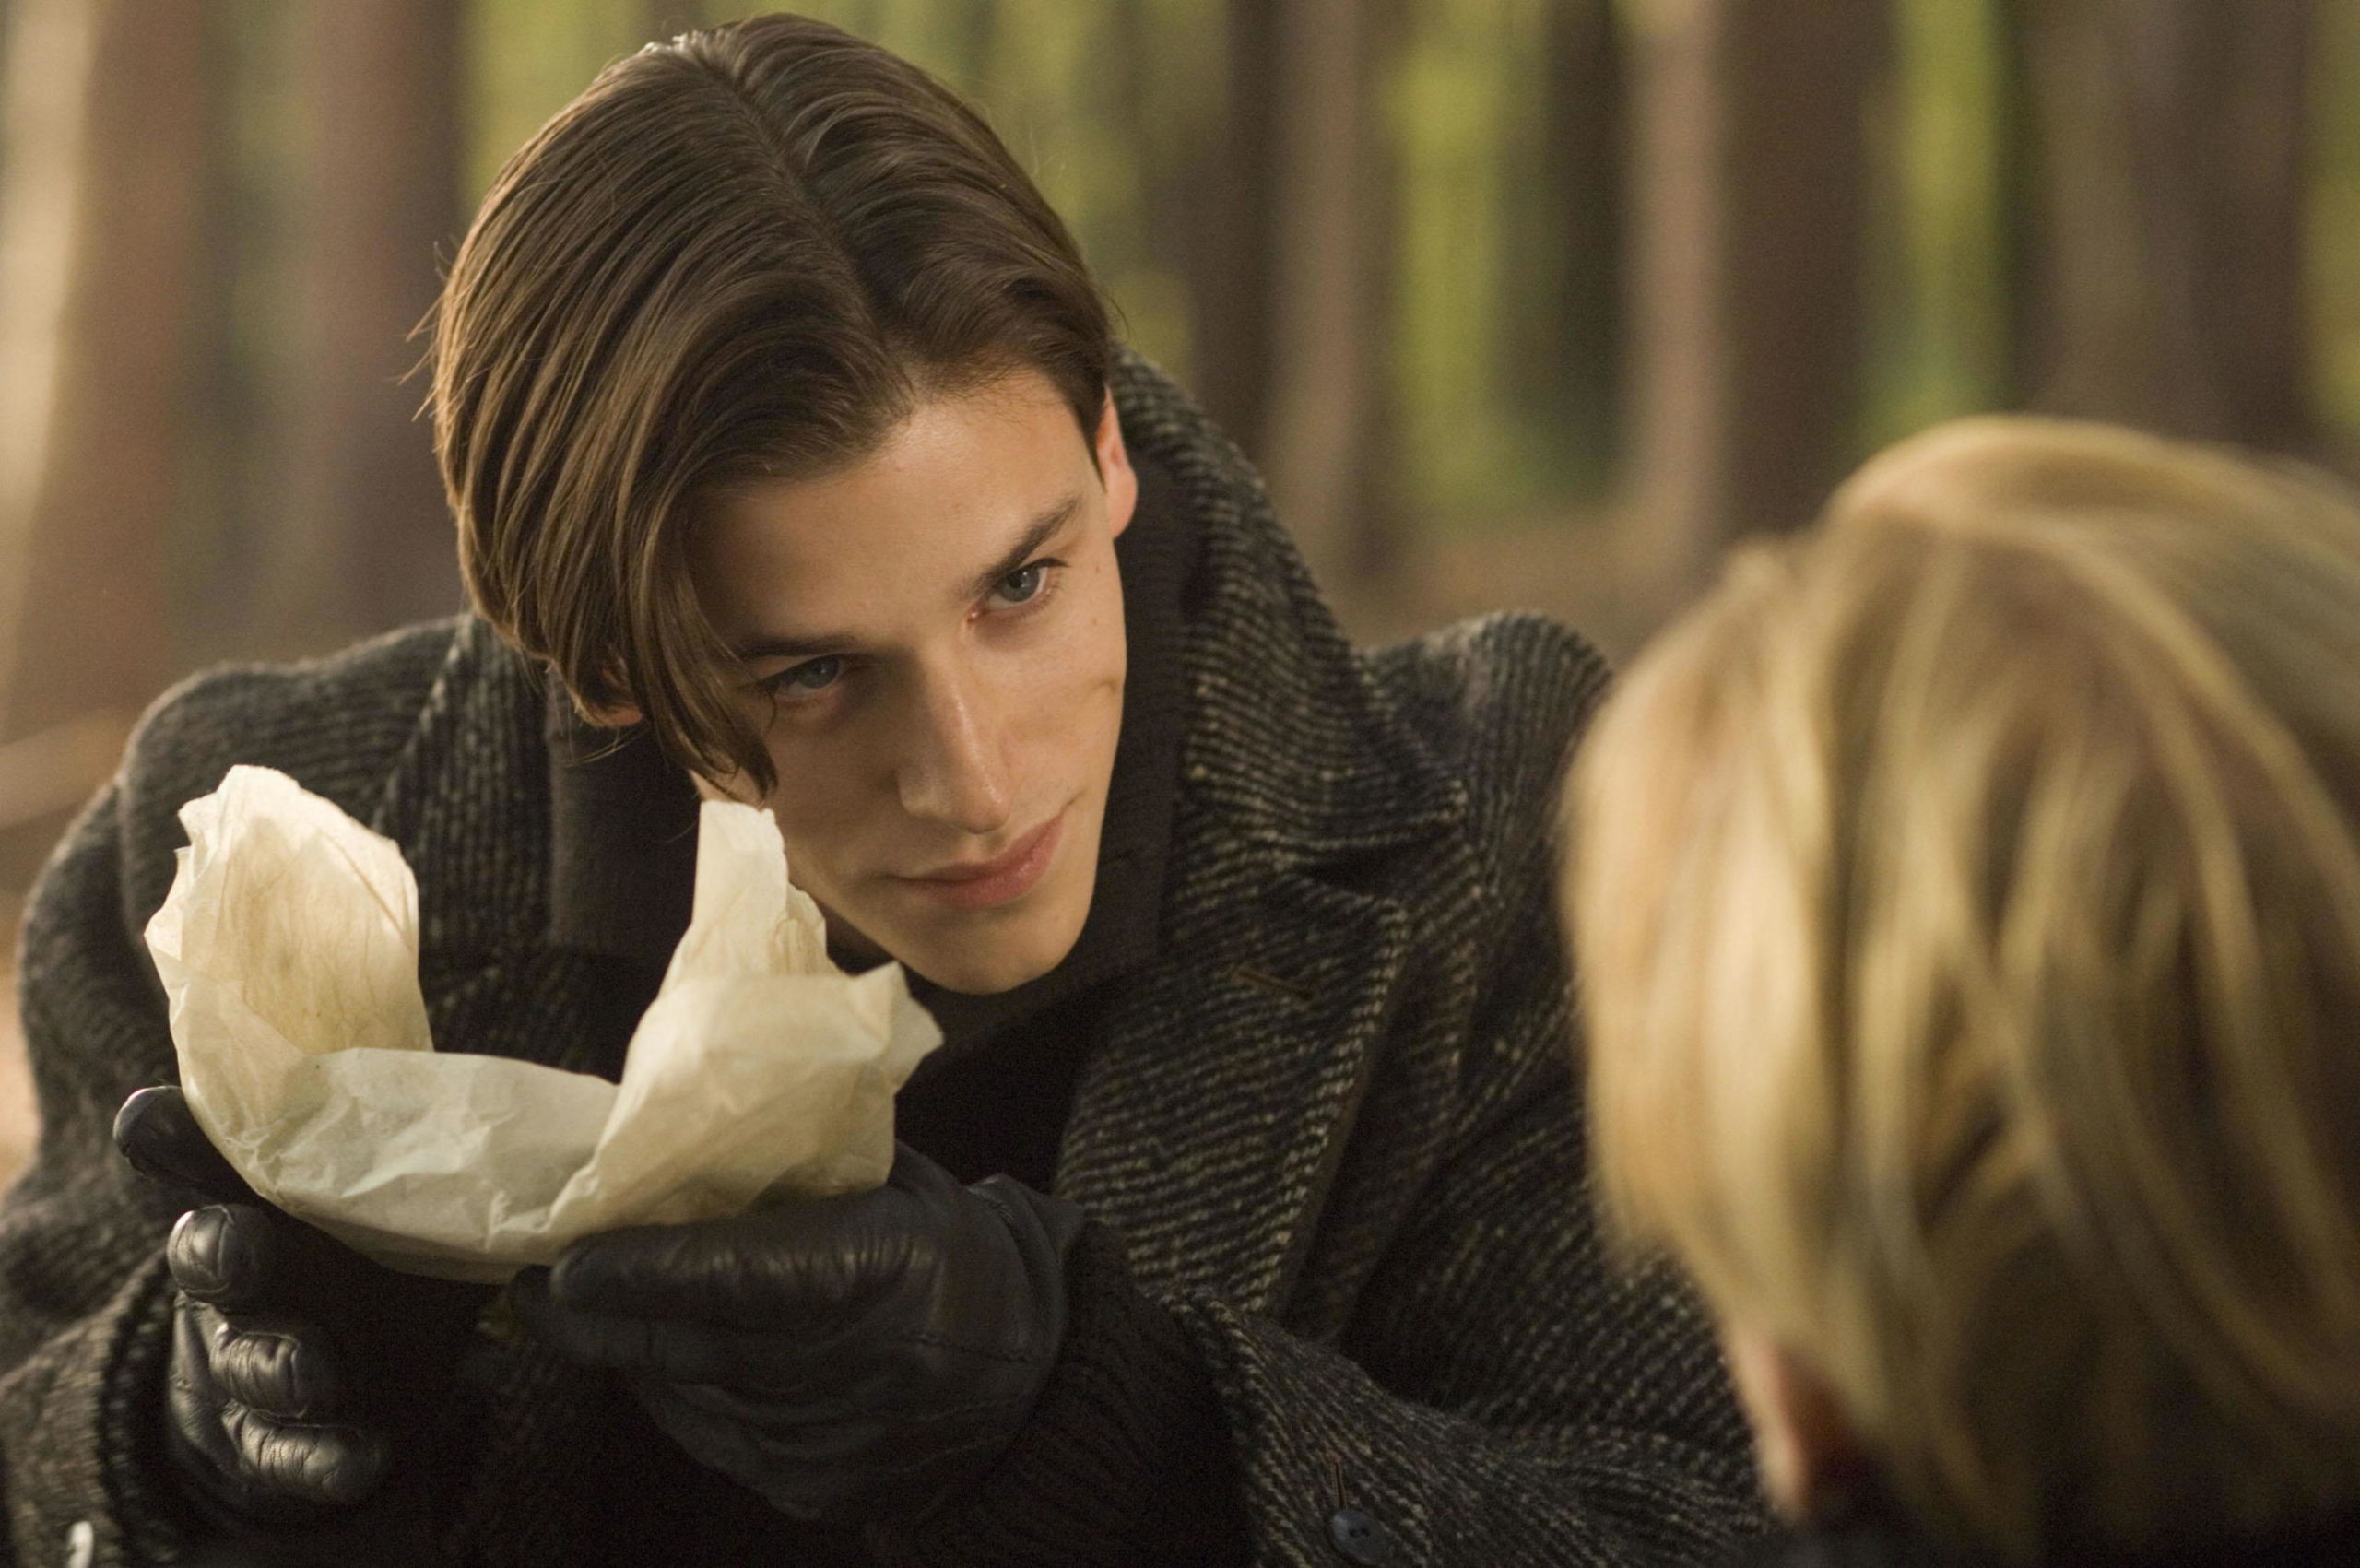 Gaspard Ulliel is the young Hannibal Lecter in "Hannibal Rising." Photo: Keith Hampshere